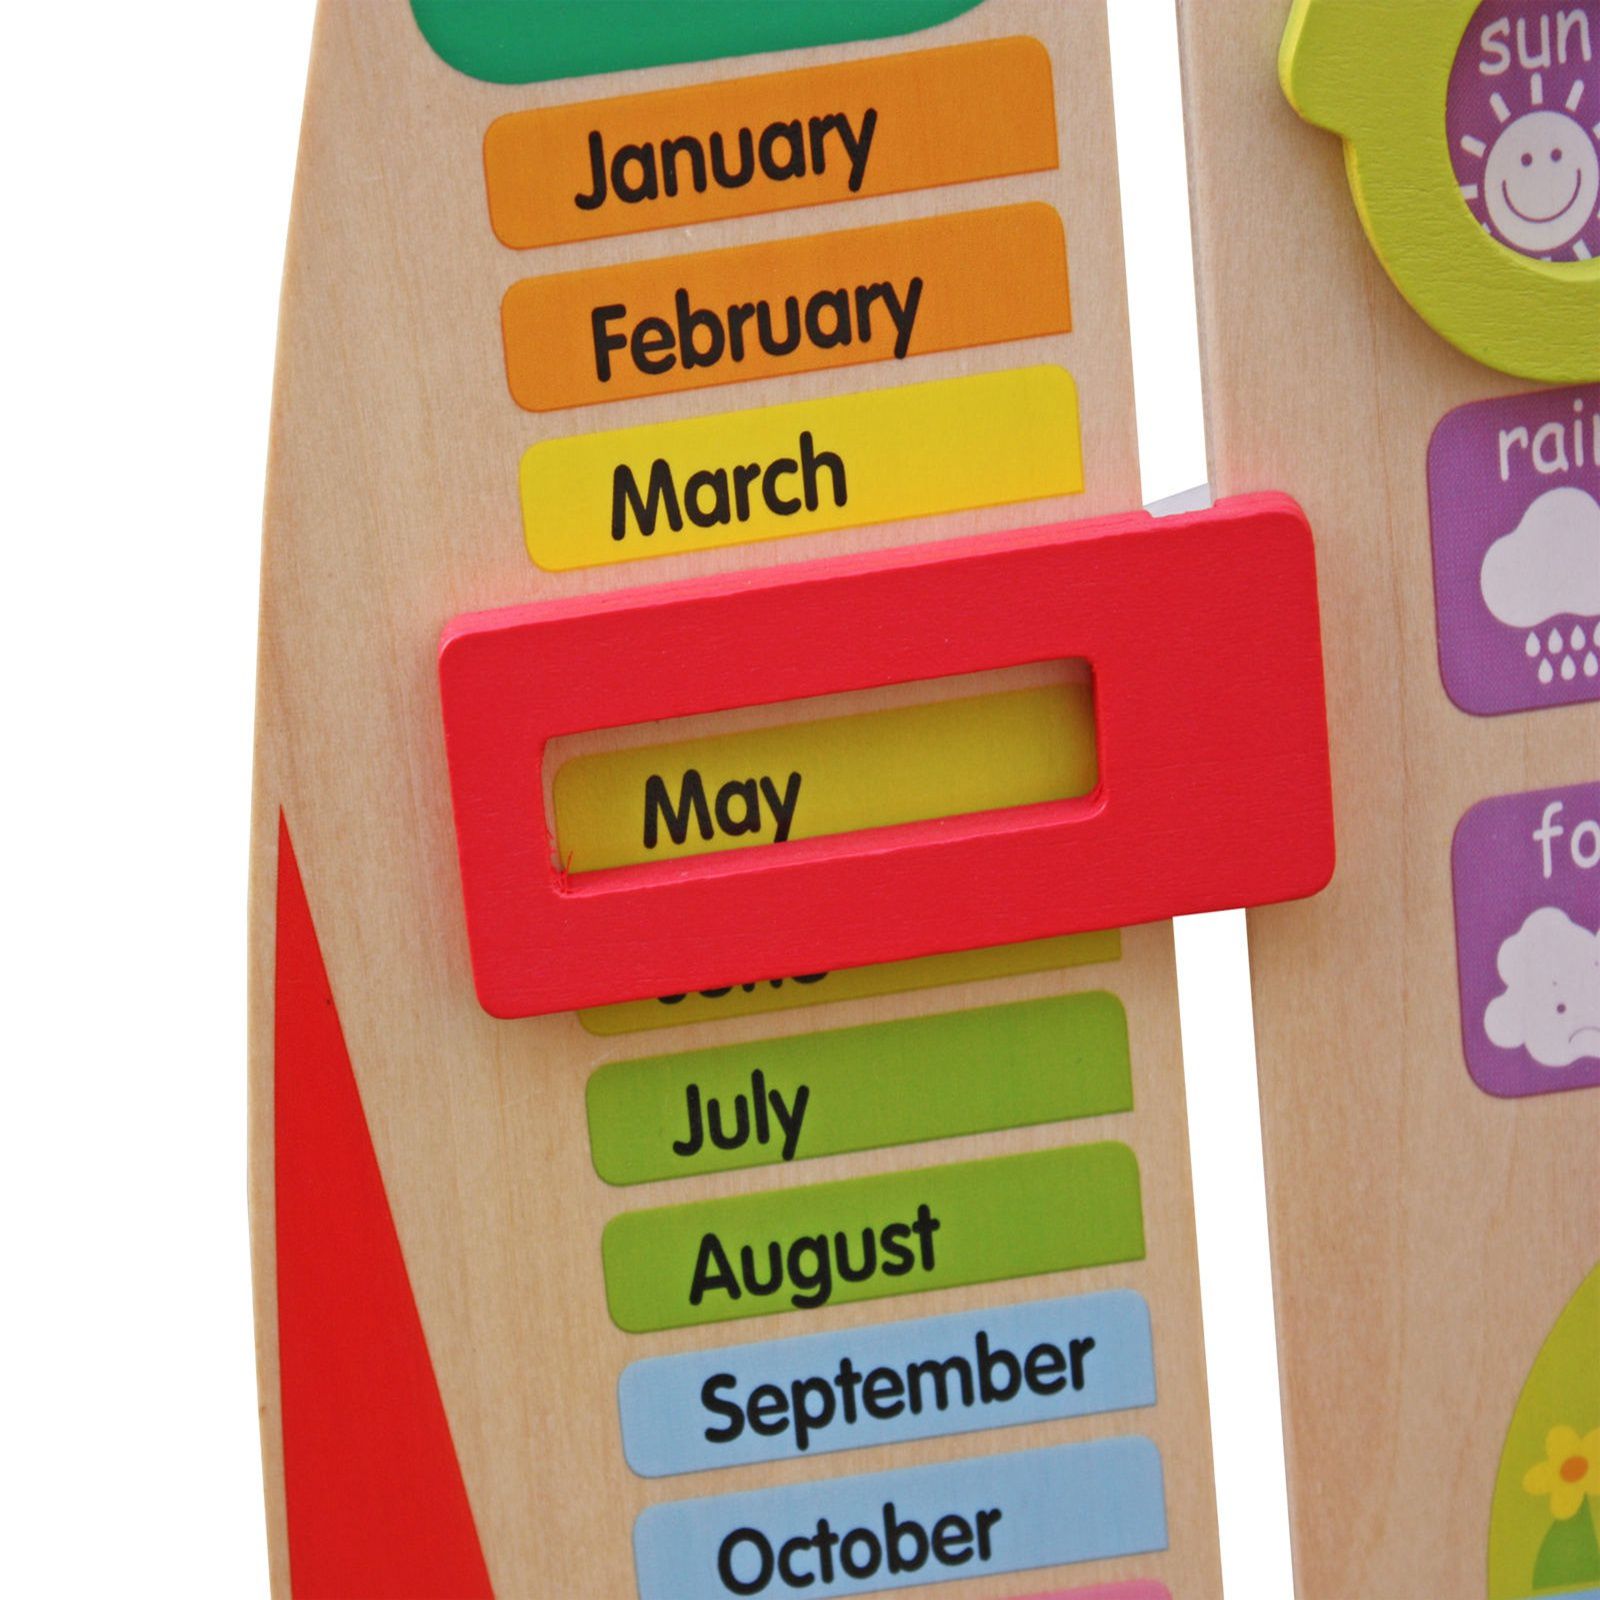 Early Learning Educationa l Wooden Calendar Toy Date Weekdays Weather